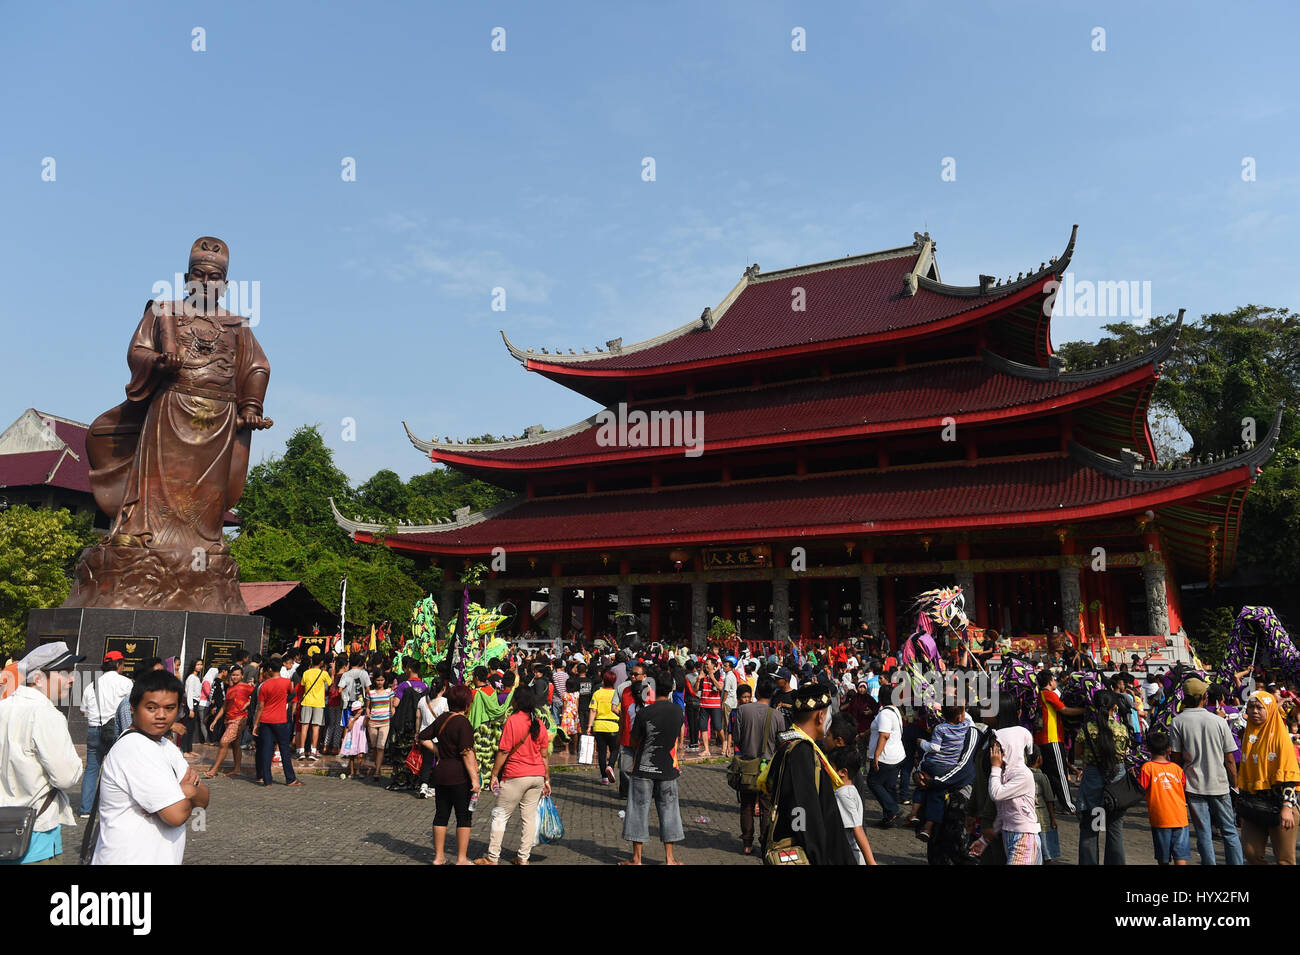 (170407) -- SEMARANG(INDONESIA), April 7, 2017 (Xinhua) -- Photo taken on July 31, 2016 shows a ceremony held to commemorate the Chinese Ming Dynasty (1368-1644) navigator Zheng He's arrival at Semarang at the Sam Poo Kong Temple in Semarang, Indonesia. Chinese navy explorer Zheng He who visited the Central Java Province's port city of Semarang 600 years ago has an enduring legacy in the capital of the province. Arriving here at the beginning of the 15th century, Zheng He made a cave on the Simongan Hill as his temporary abode and repaired his ships. During his stay, Zheng He built a mosque an Stock Photo